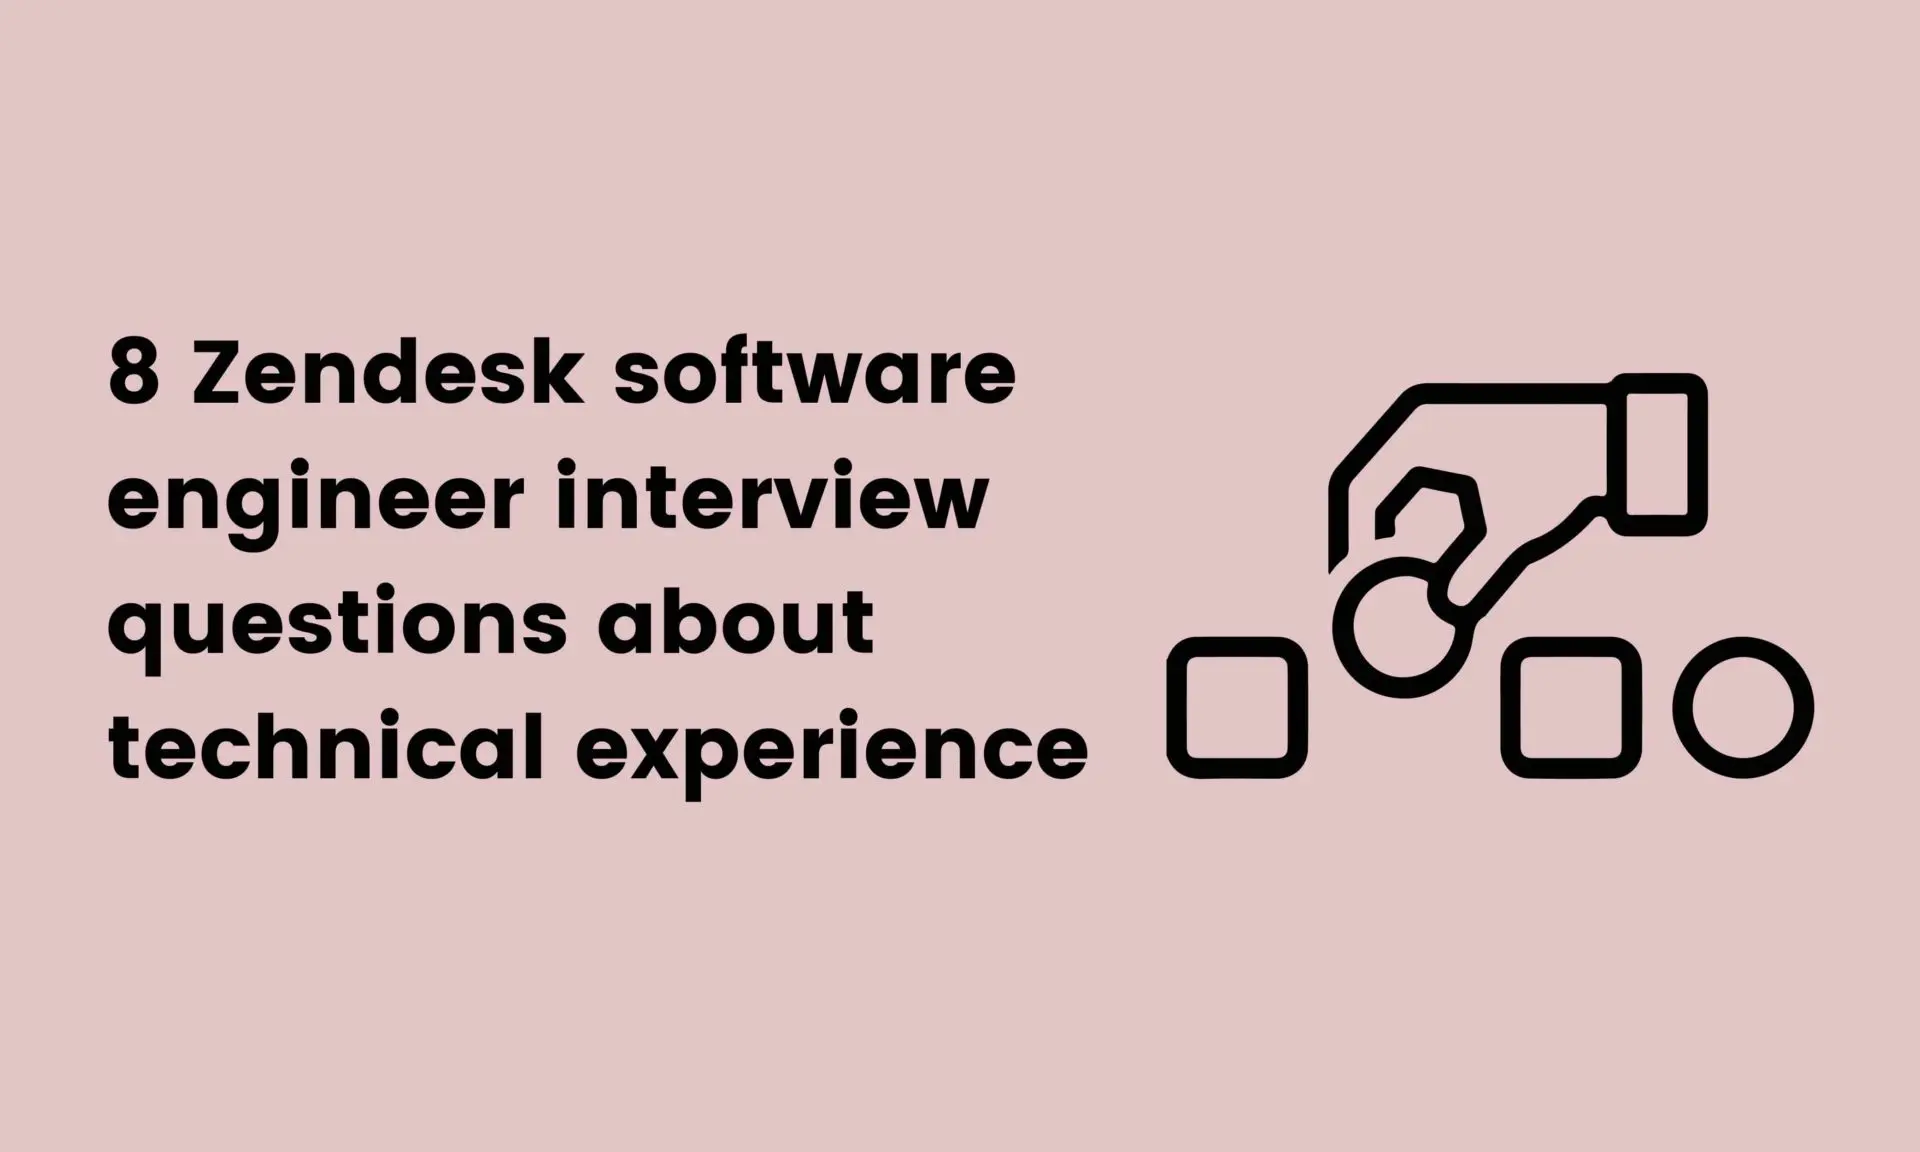 8 Zendesk software engineer interview questions about technical experience